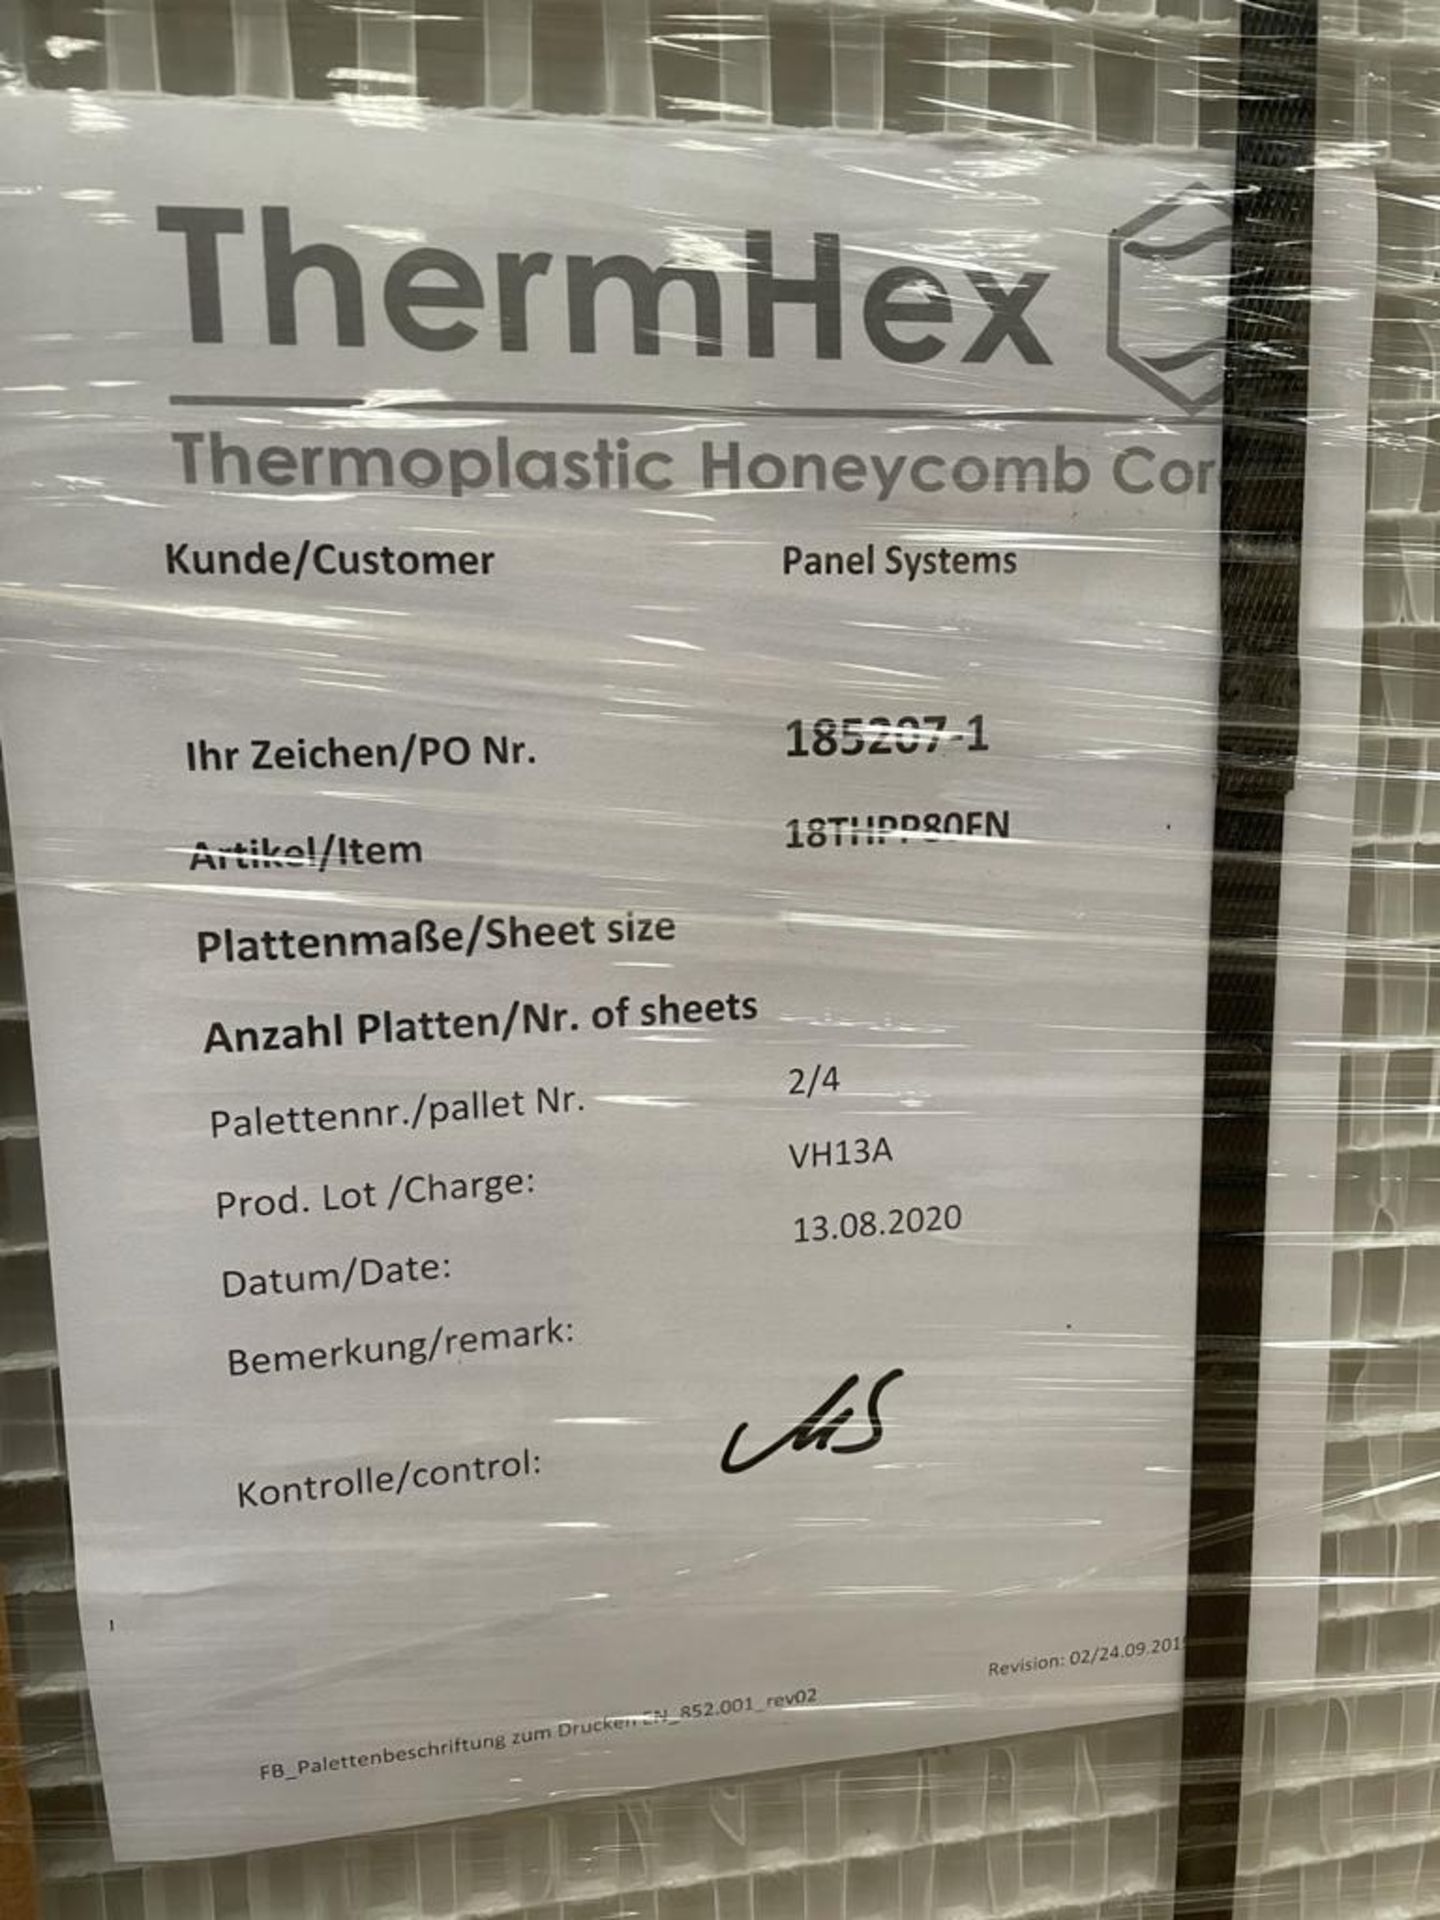 25 x ThermHex Thermoplastic Honeycomb Core Panels - Size 3175 x 1210 x 18mm - New Stock - - Image 2 of 8